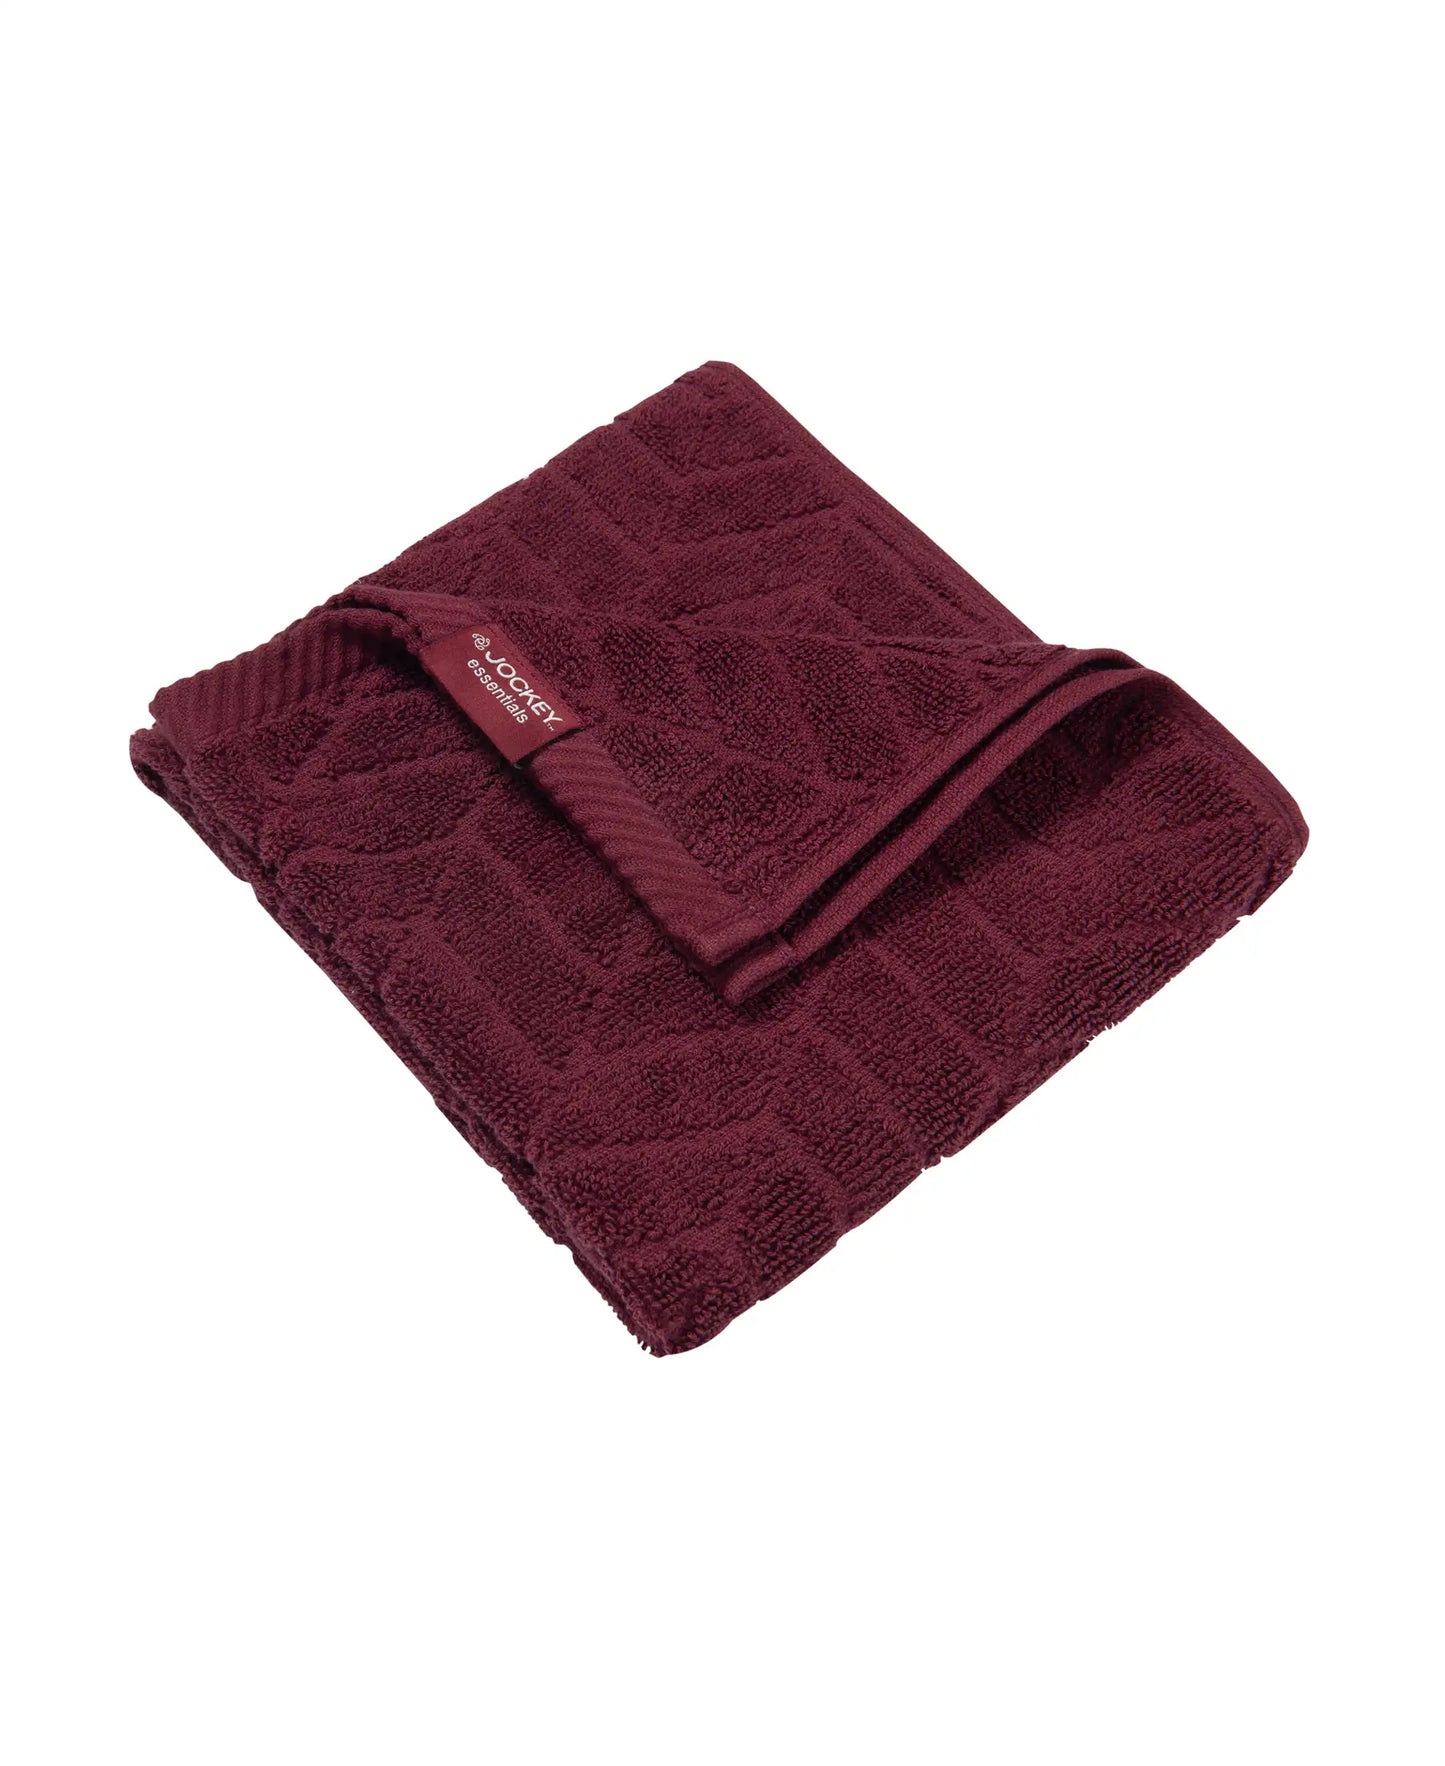 Cotton Terry Ultrasoft and Durable Patterned Hand Towel - Burgundy-3